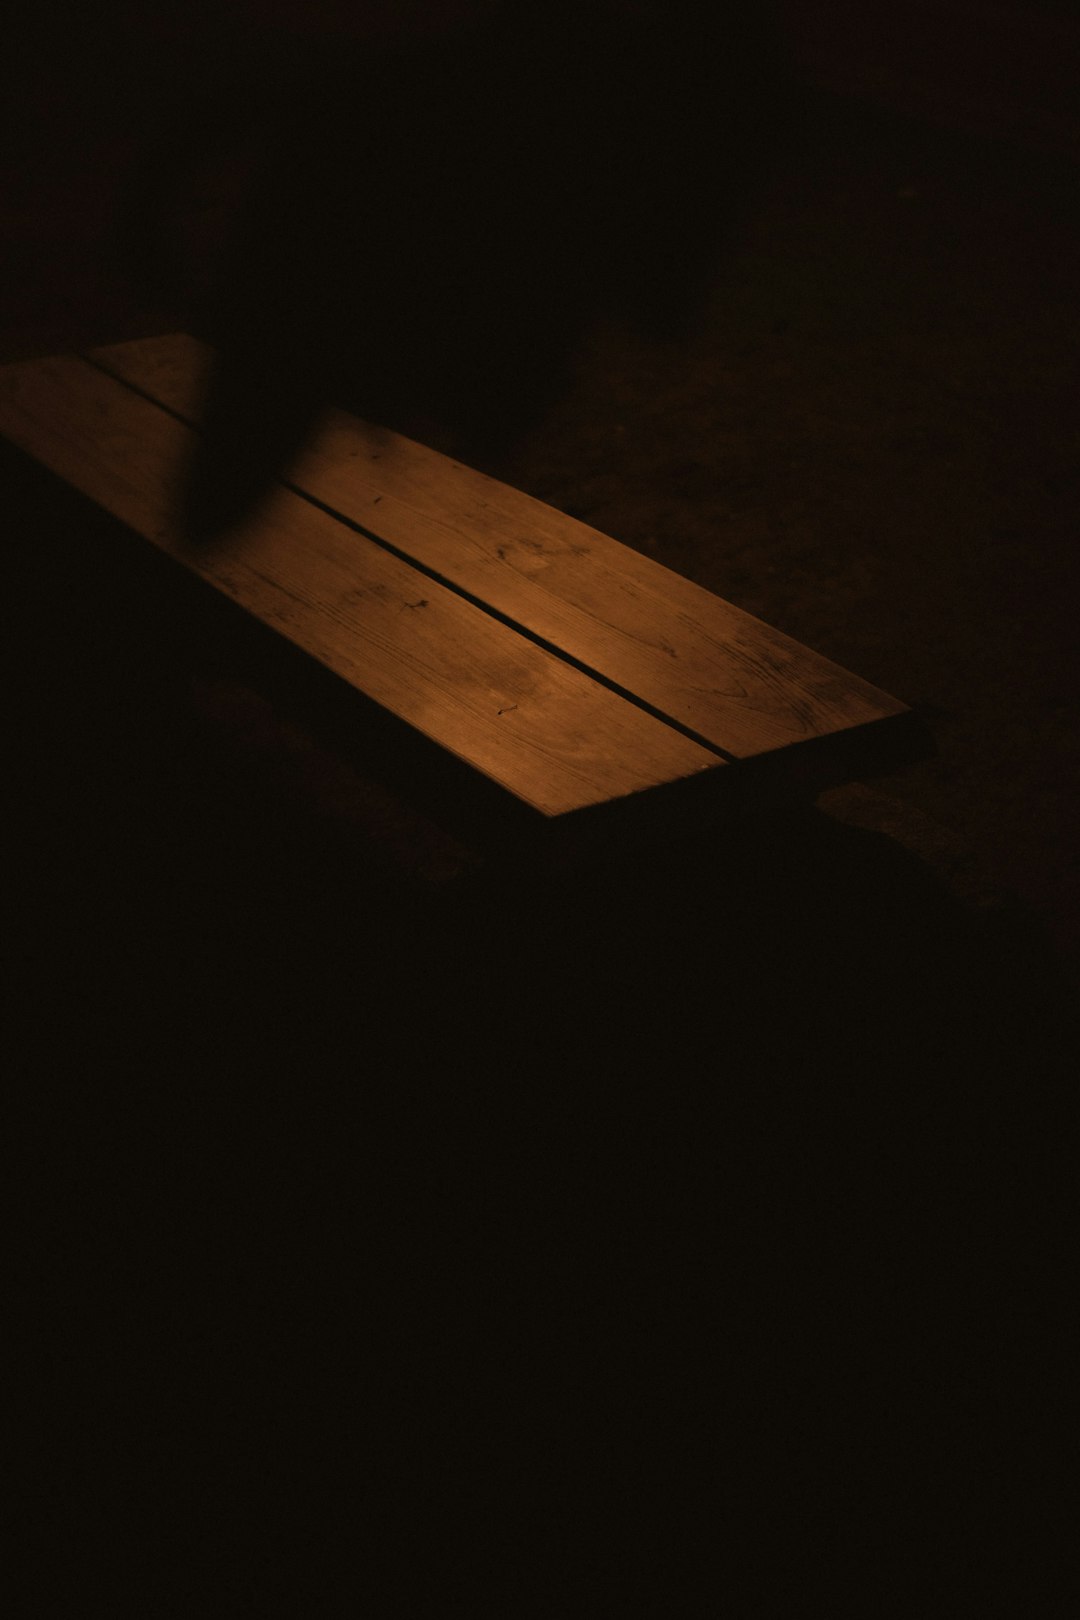 brown wooden plank on black surface